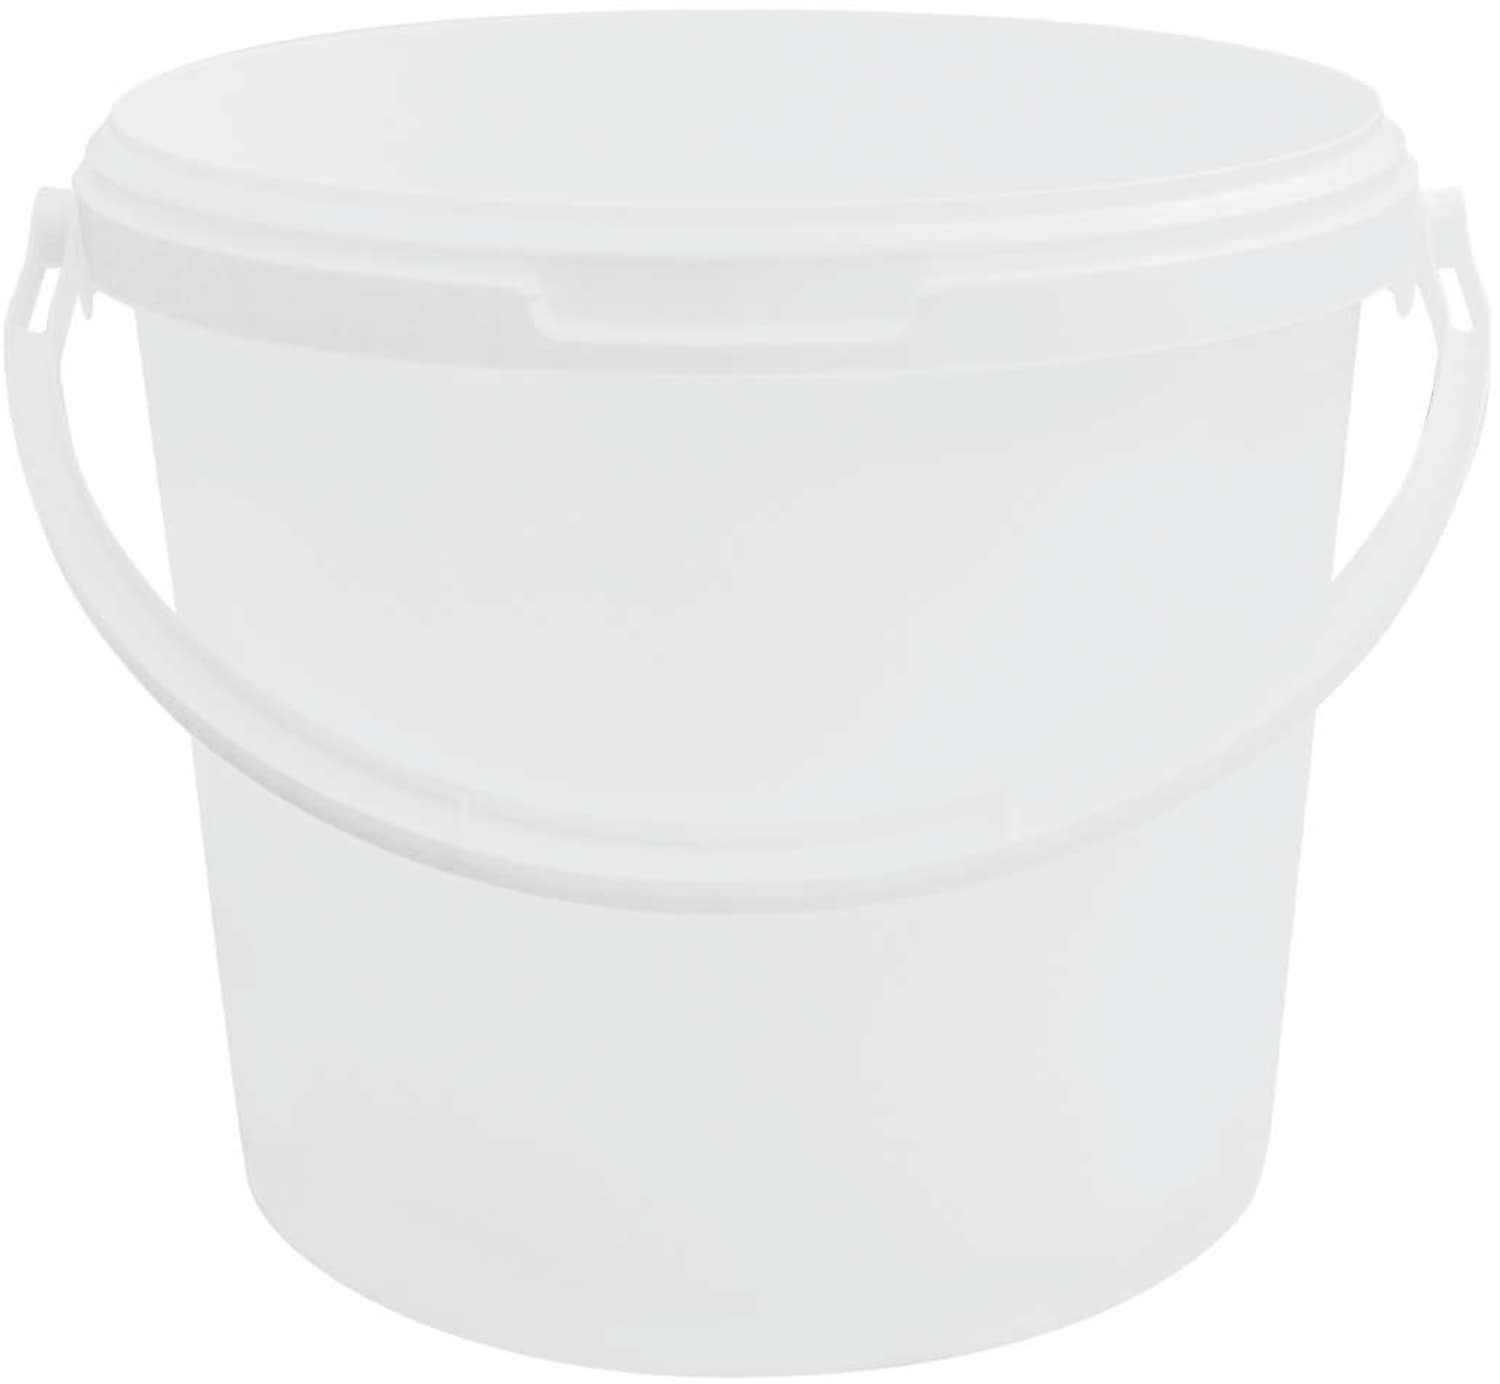 Bucket for dispensers